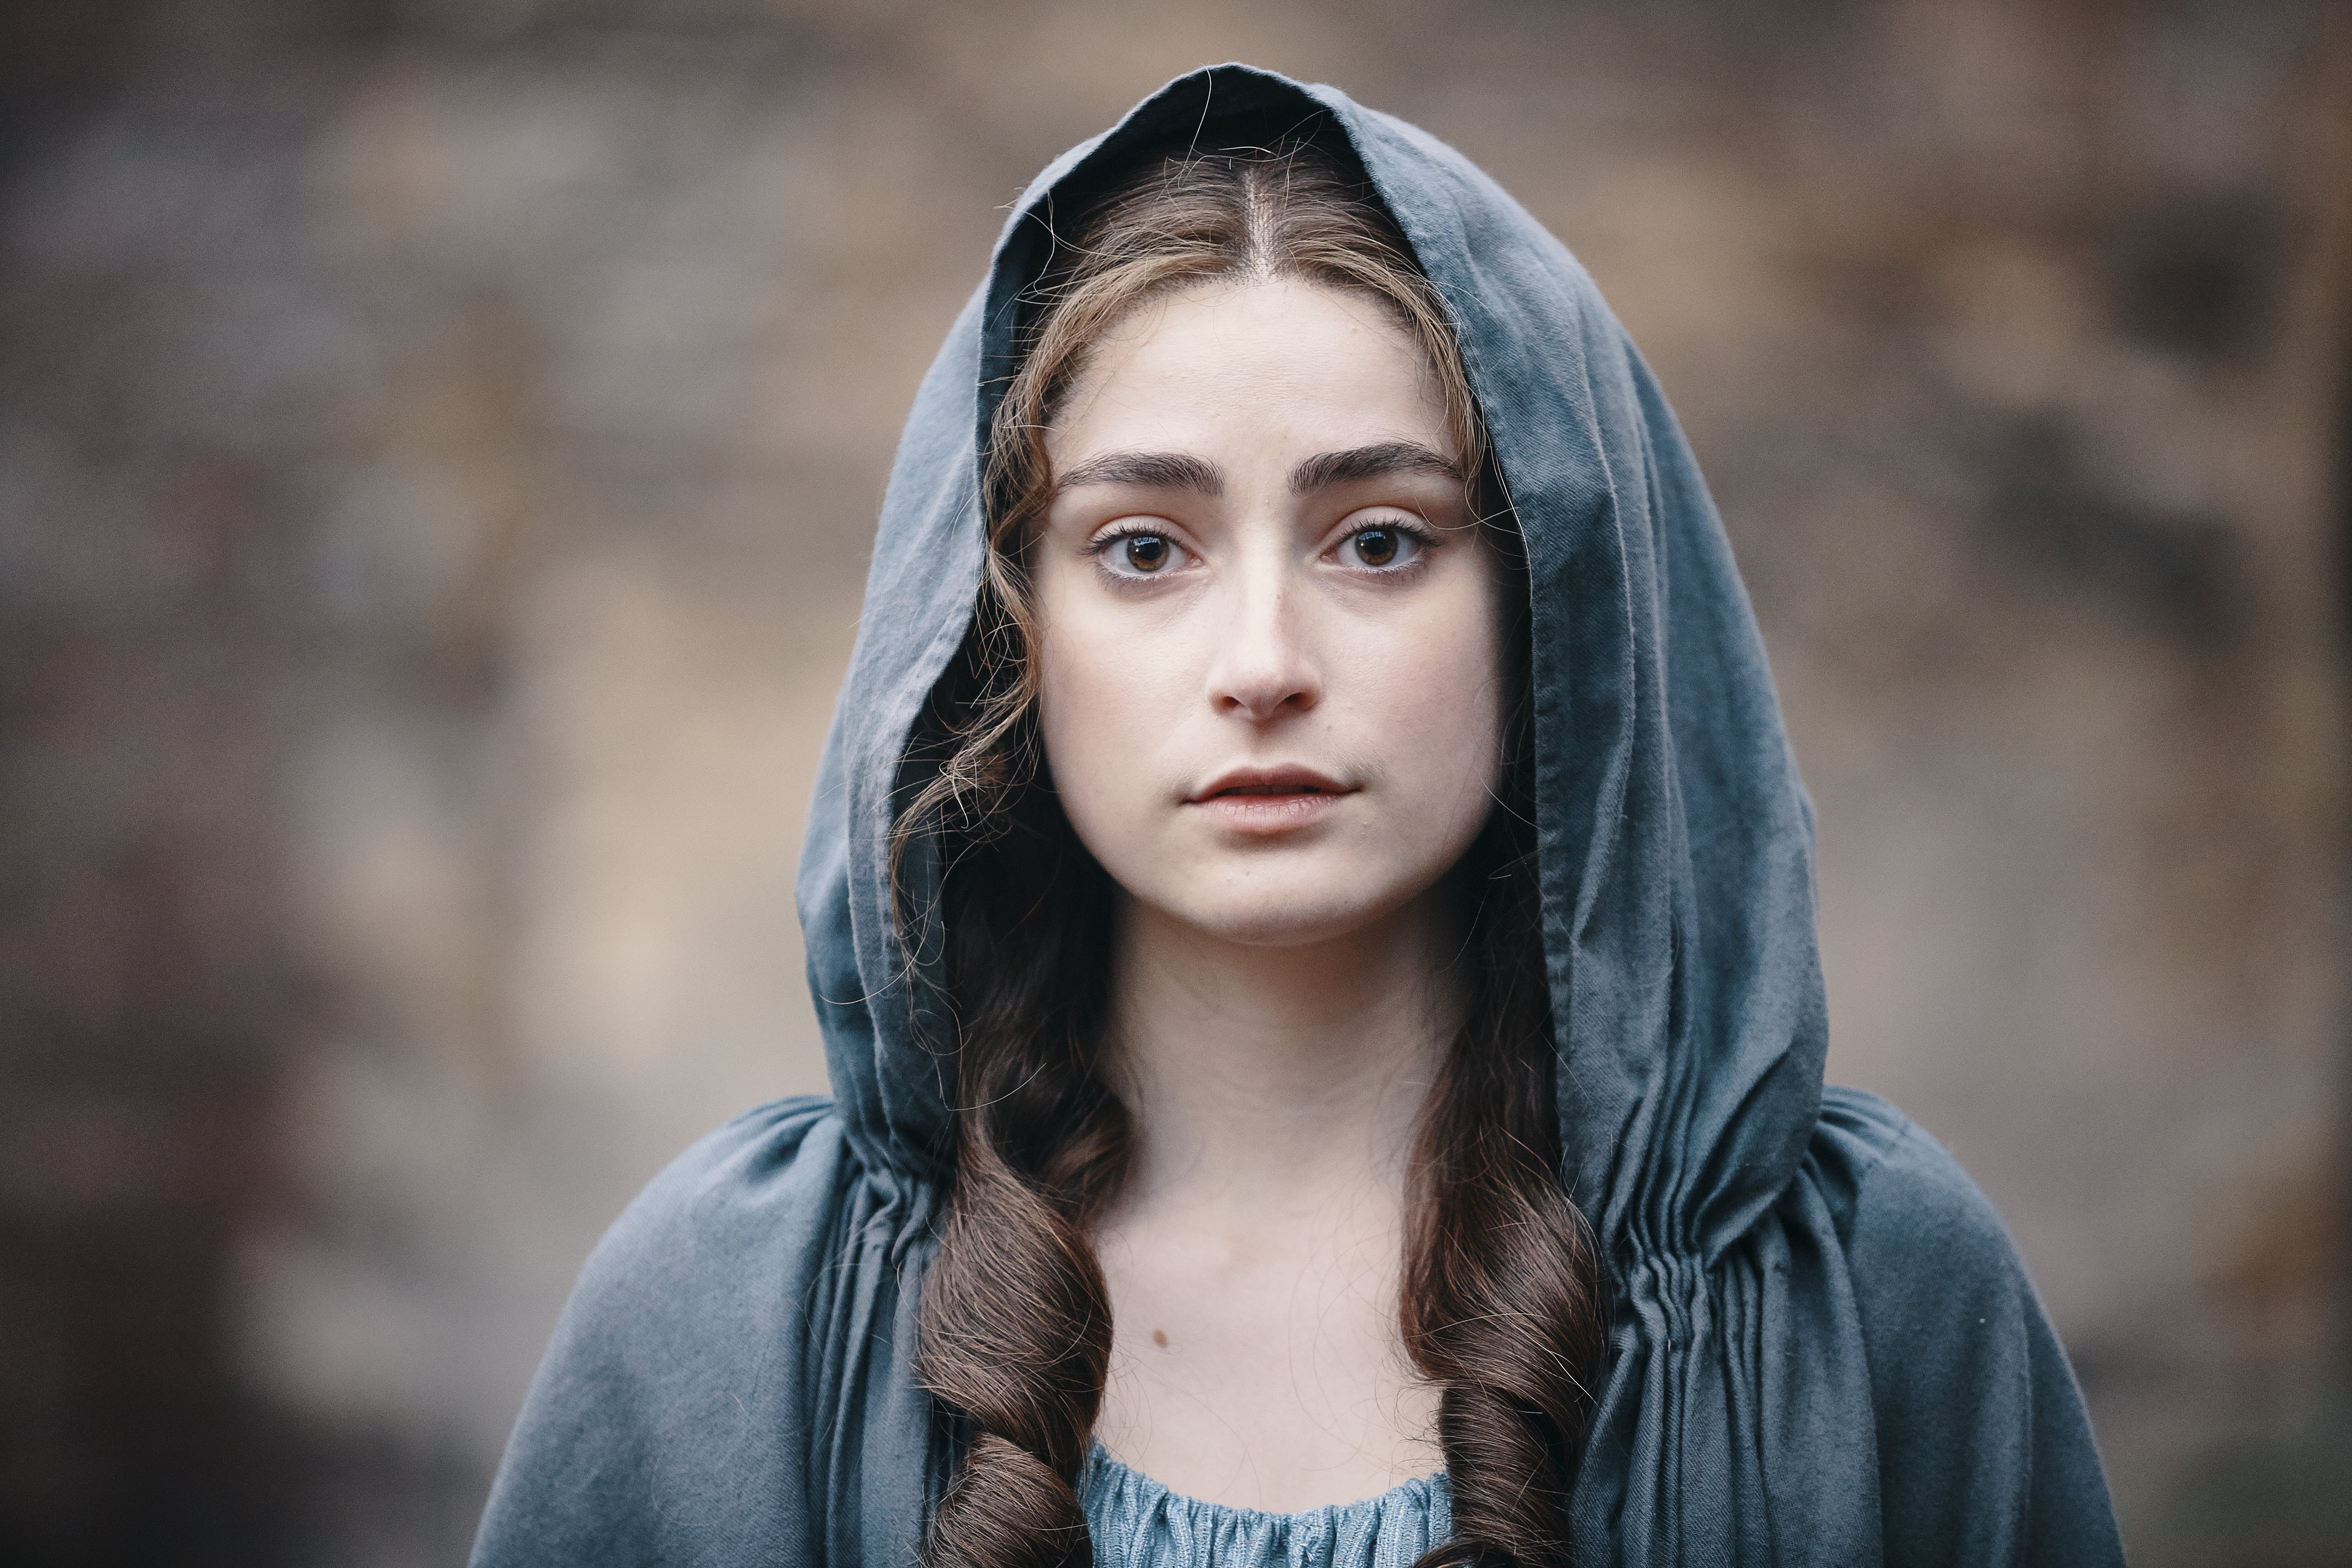 Interview: Ellise Chappell on returning to 'Poldark' - Articles | CROOKES Magazine